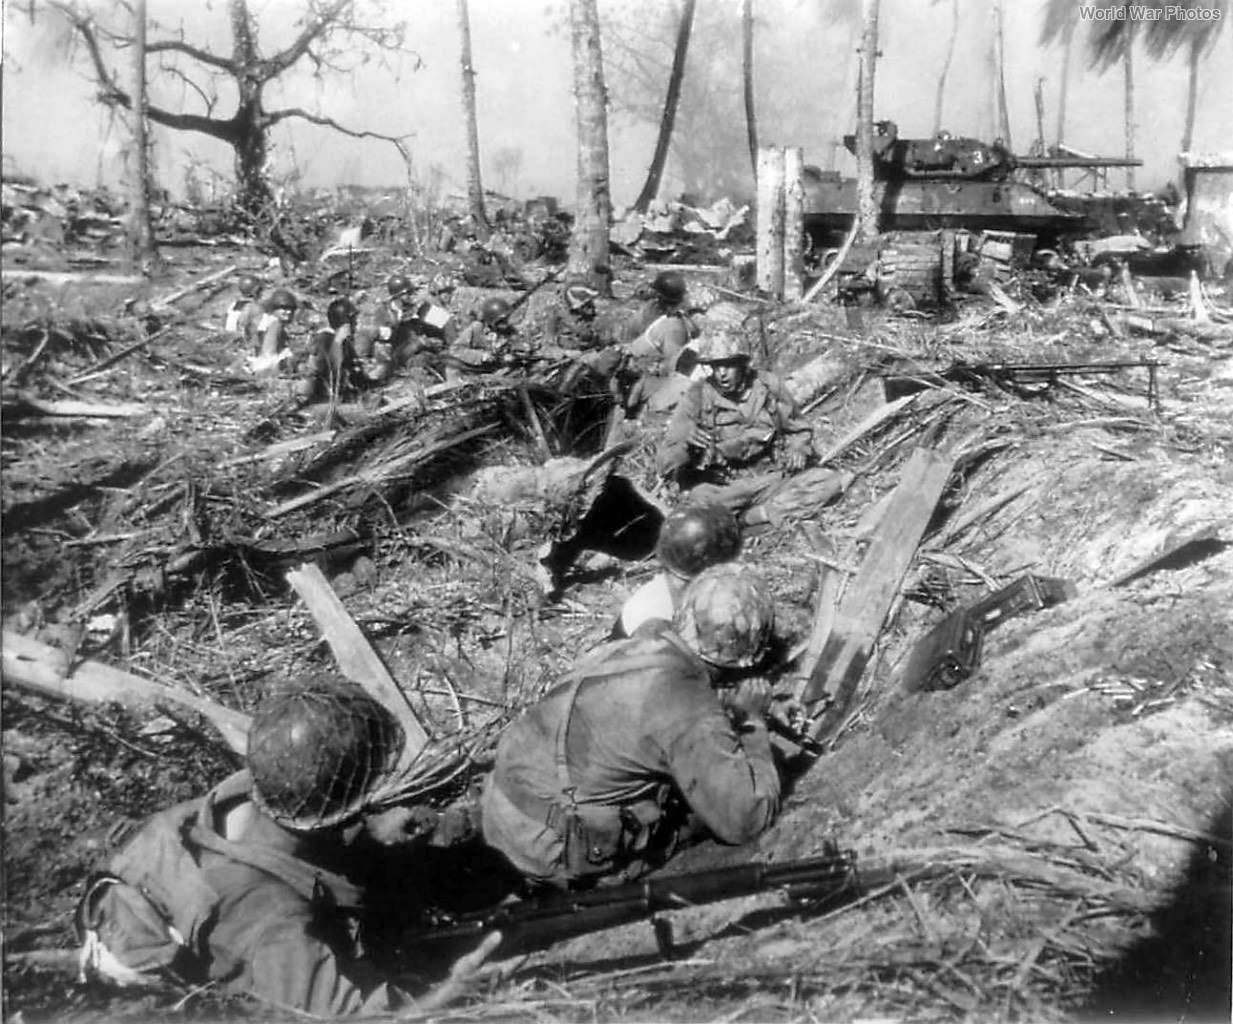 7th Infantry Division soldiers and 767th Tank Battalion M10 advance on  Kwajalein | World War Photos